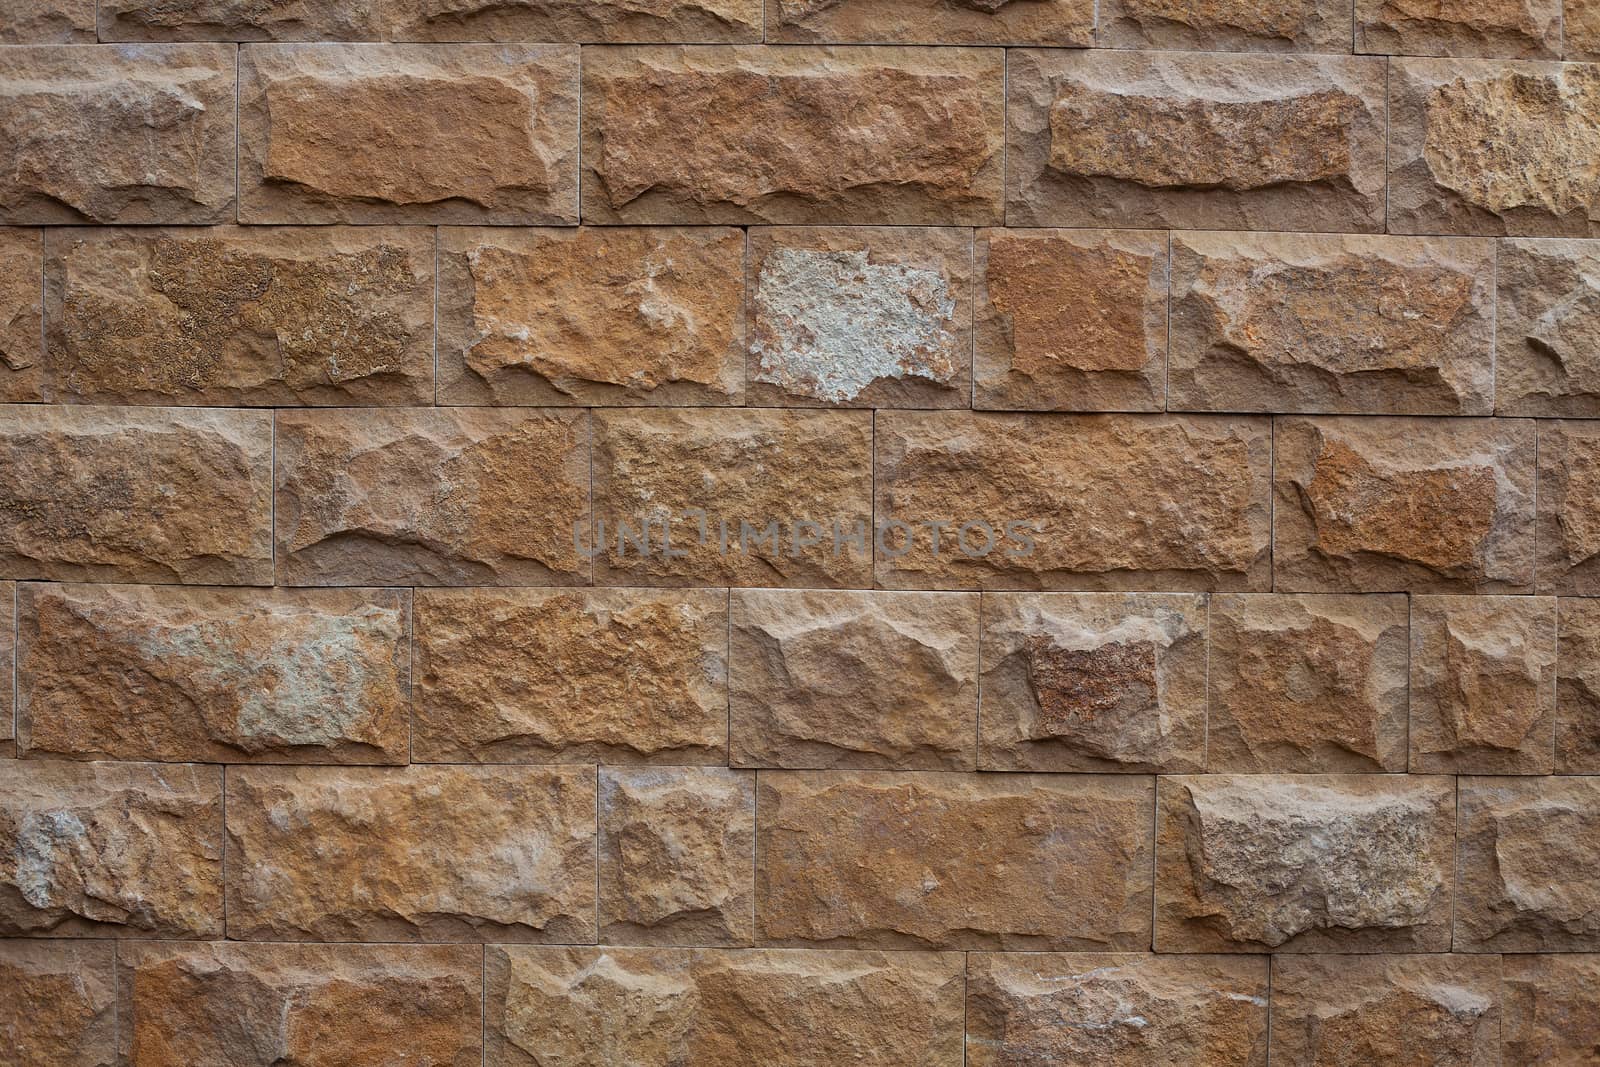 Sandstone wall by Angorius